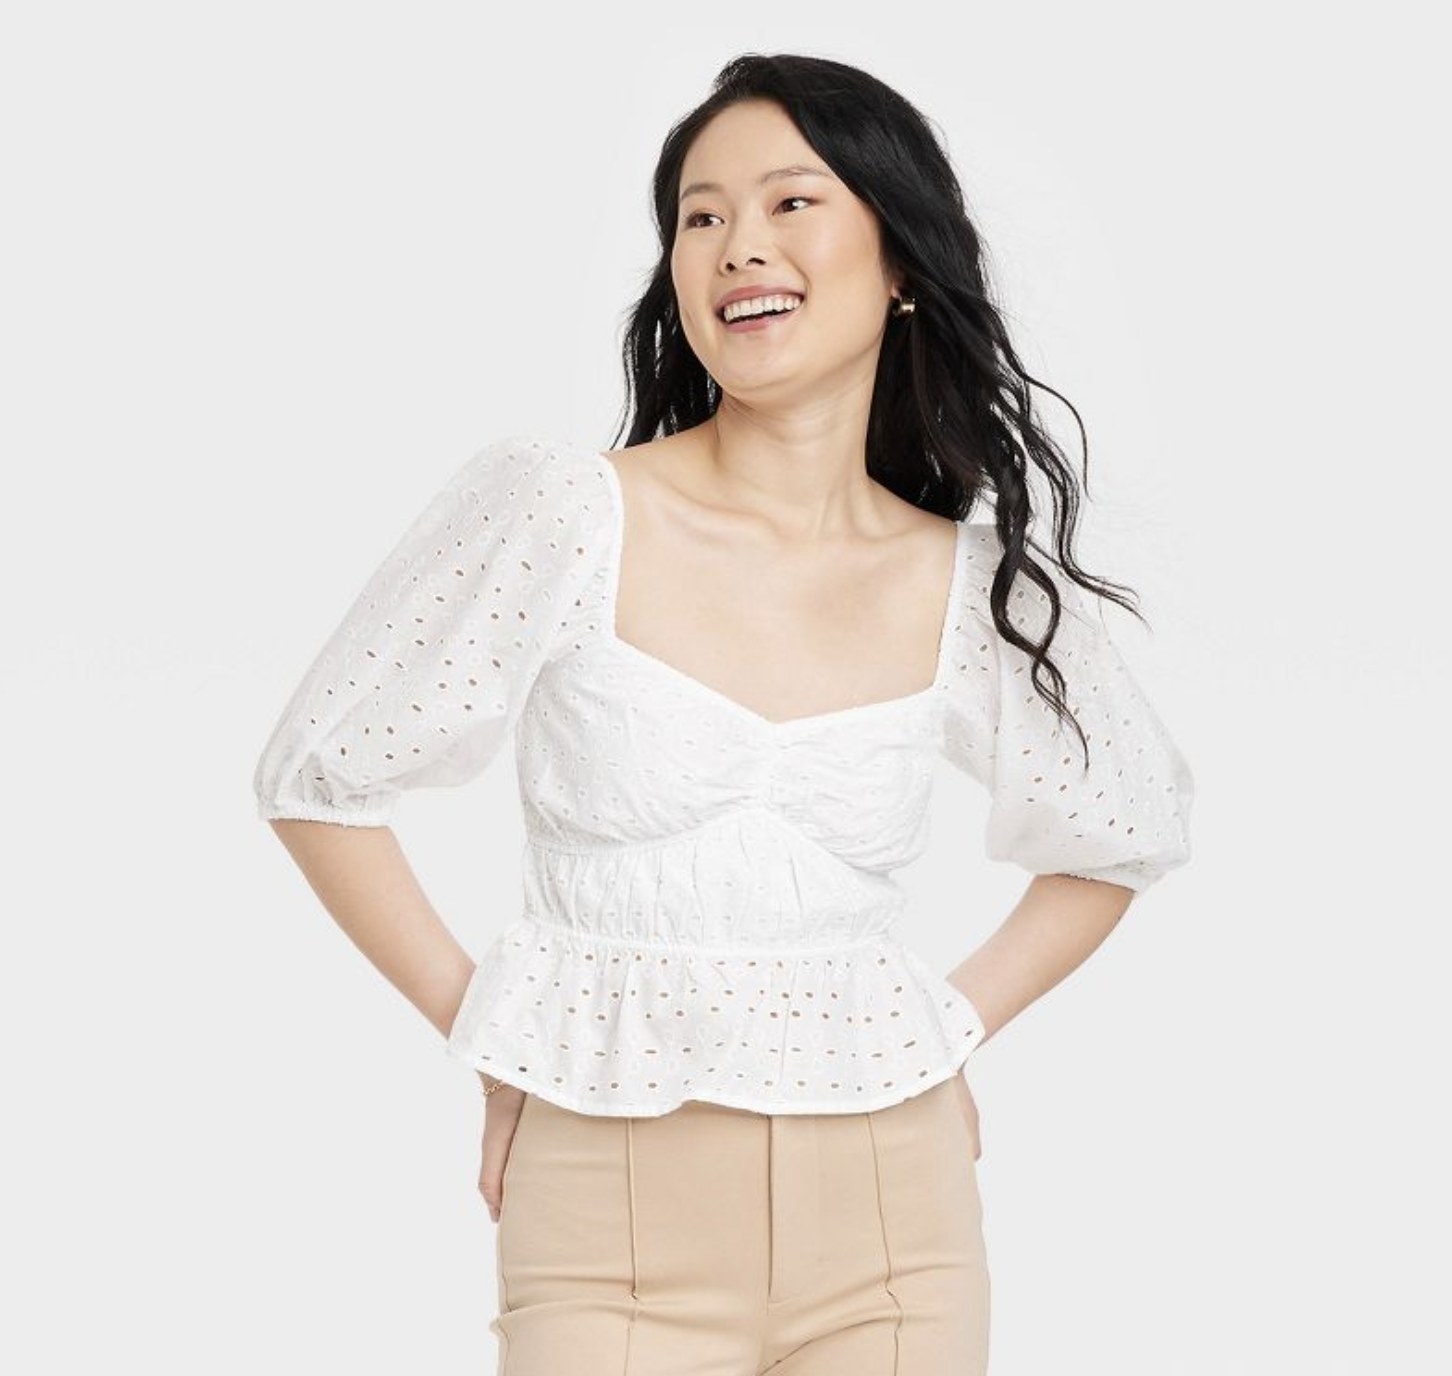 A person with long black hair wearing a white peplum blouse